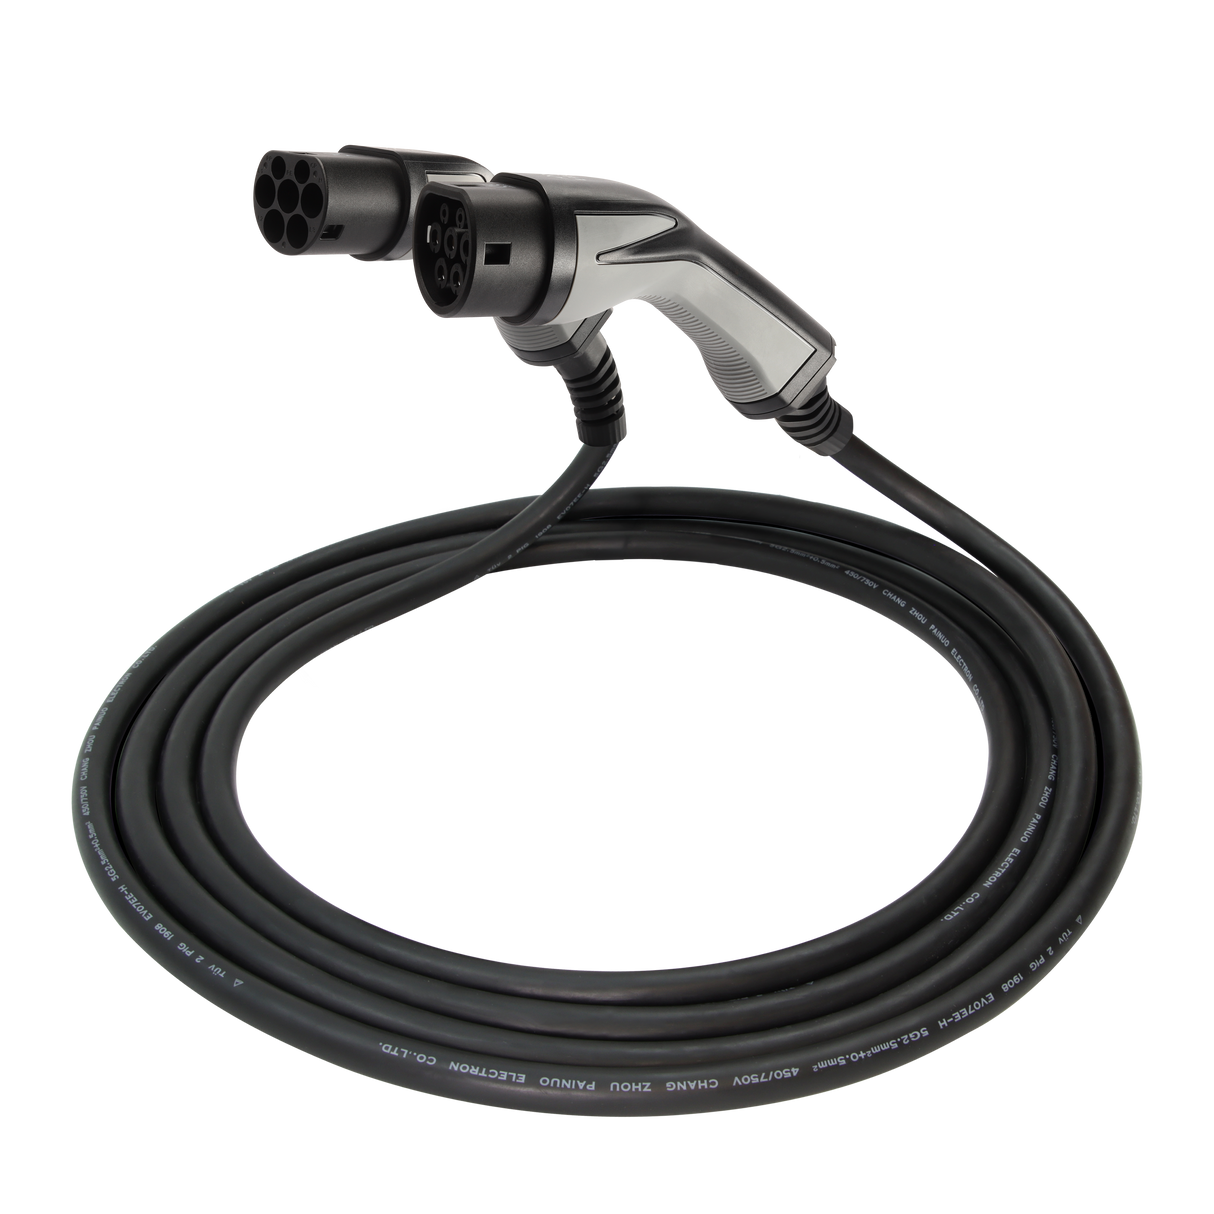 Charging cable Peugeot E -308 SW - Erock Pro Type 2 - 16A 3 phase (11 kW)